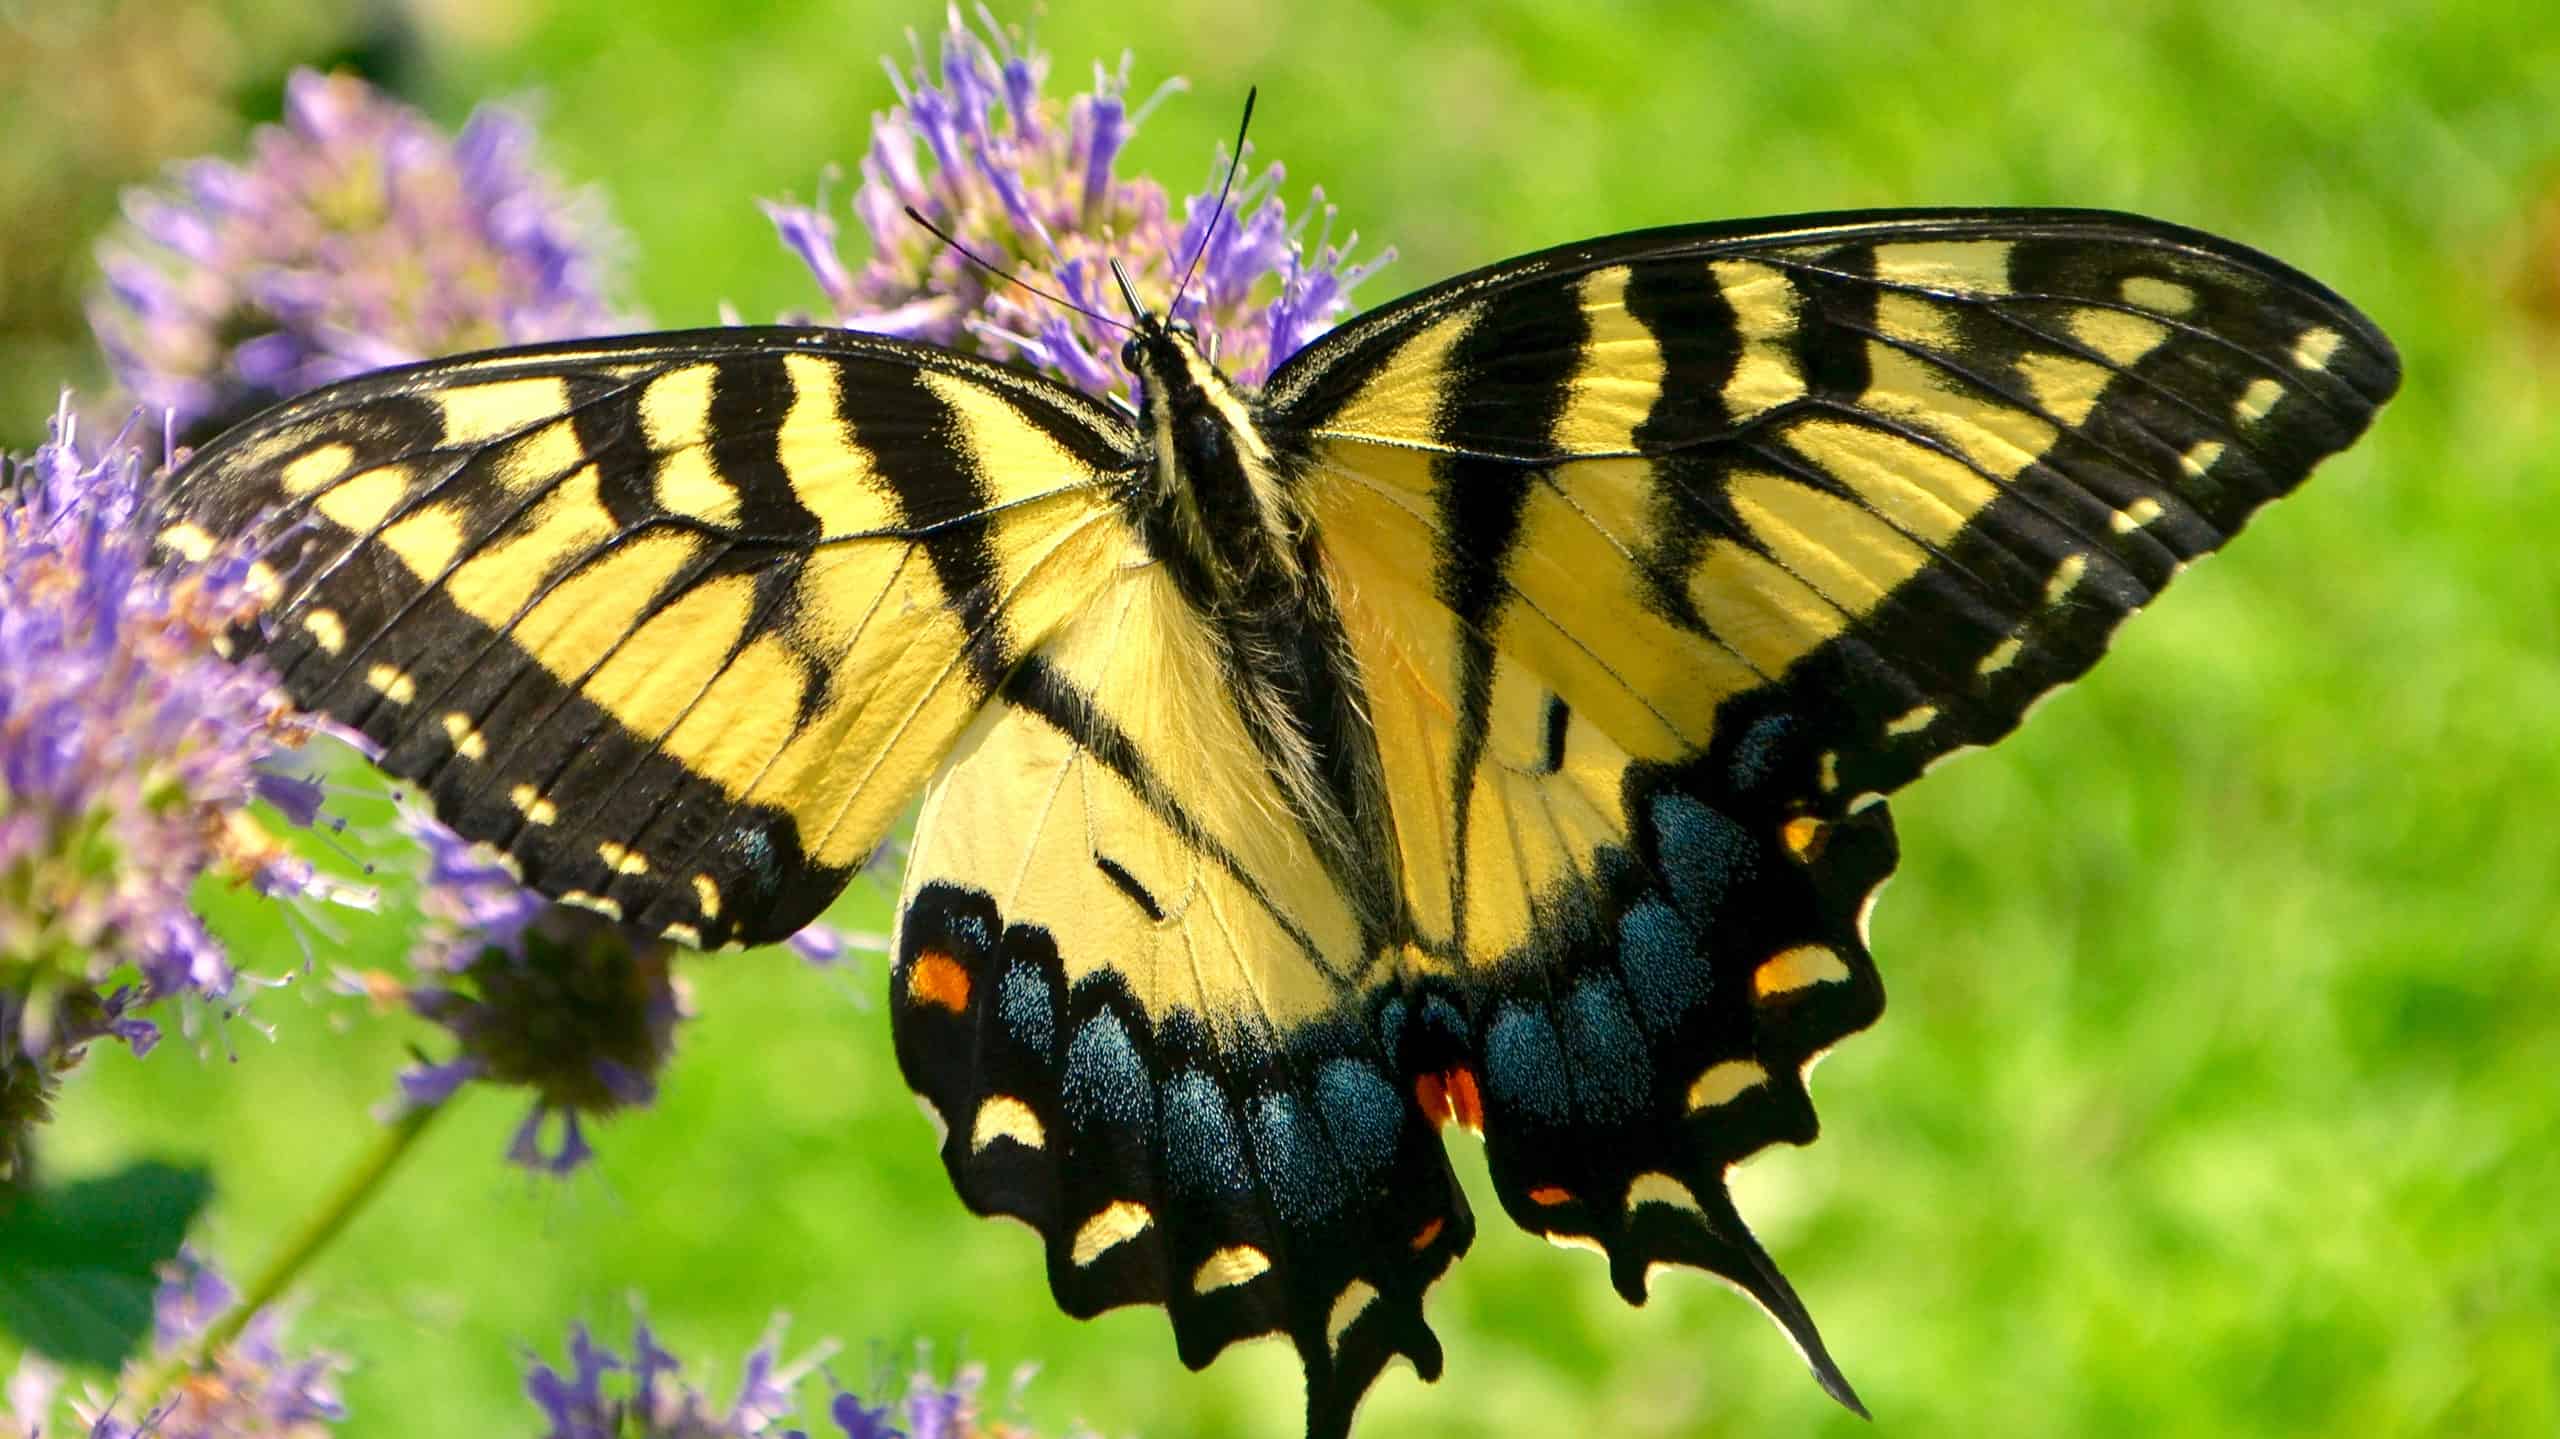 photograph of an eastern tiger swallowtail butterfly. The butterfly is feeding from a purple flower. The butterfly is light oranger and biack striped.